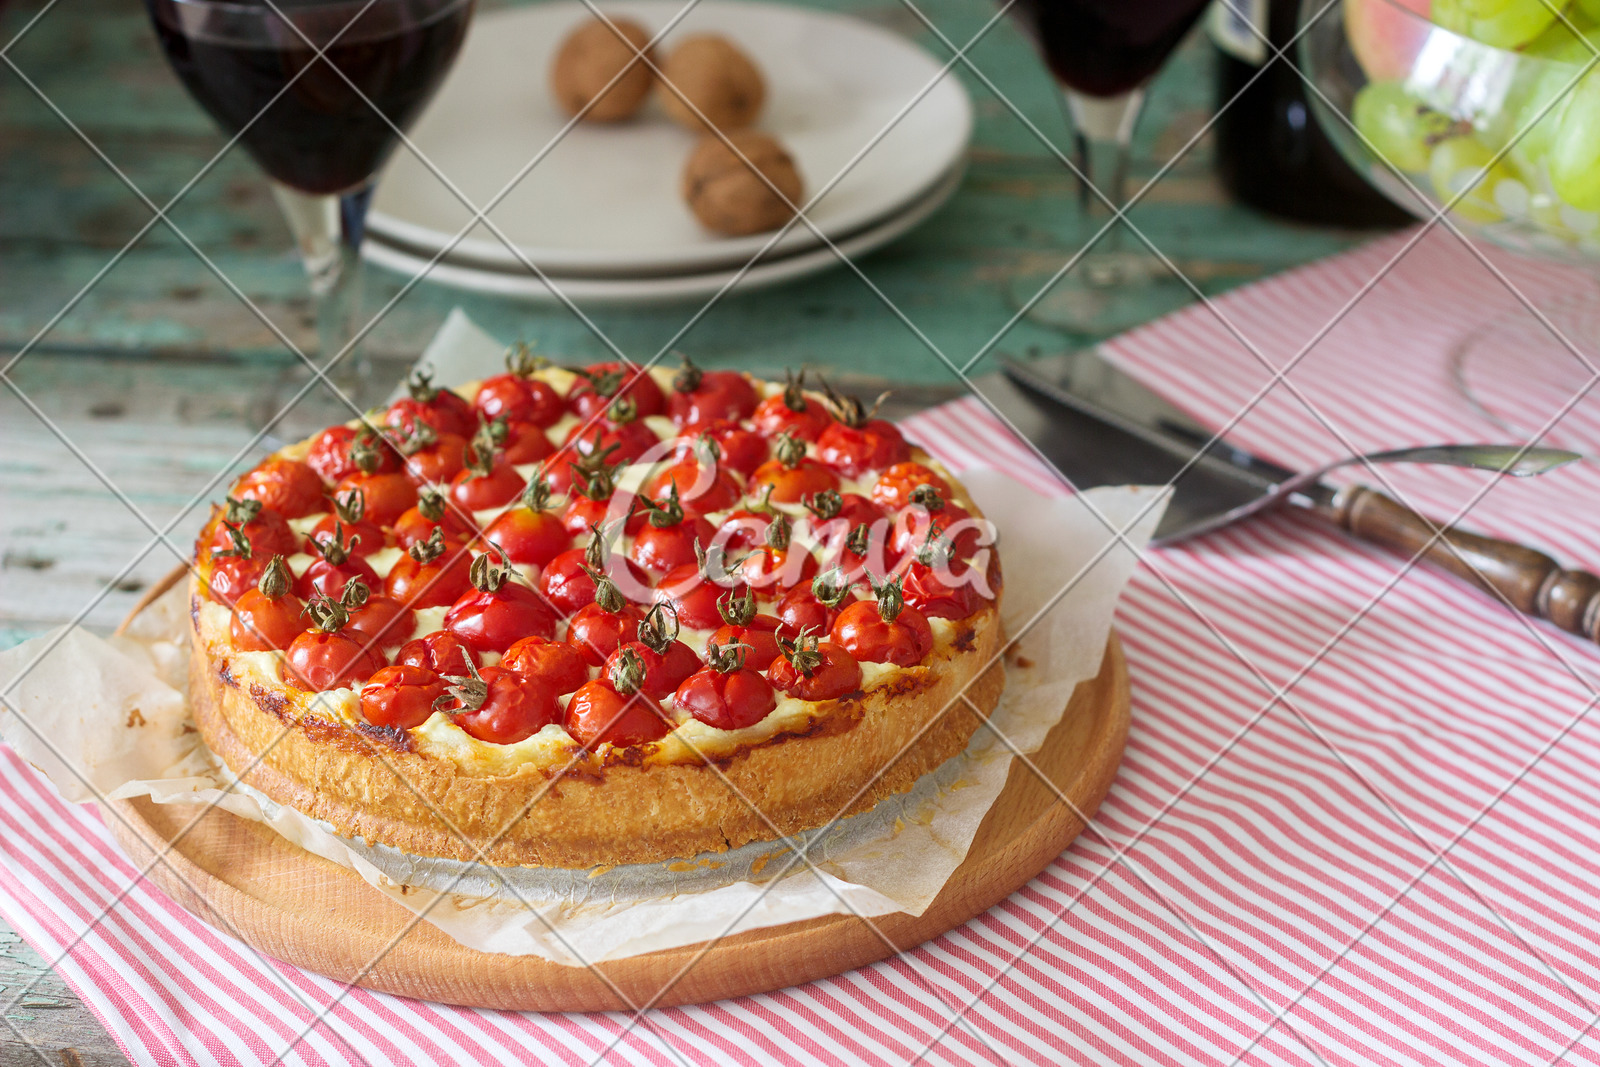 Tart Pie Or Cheesecake With Cottage Cheese And Tomatoes Served